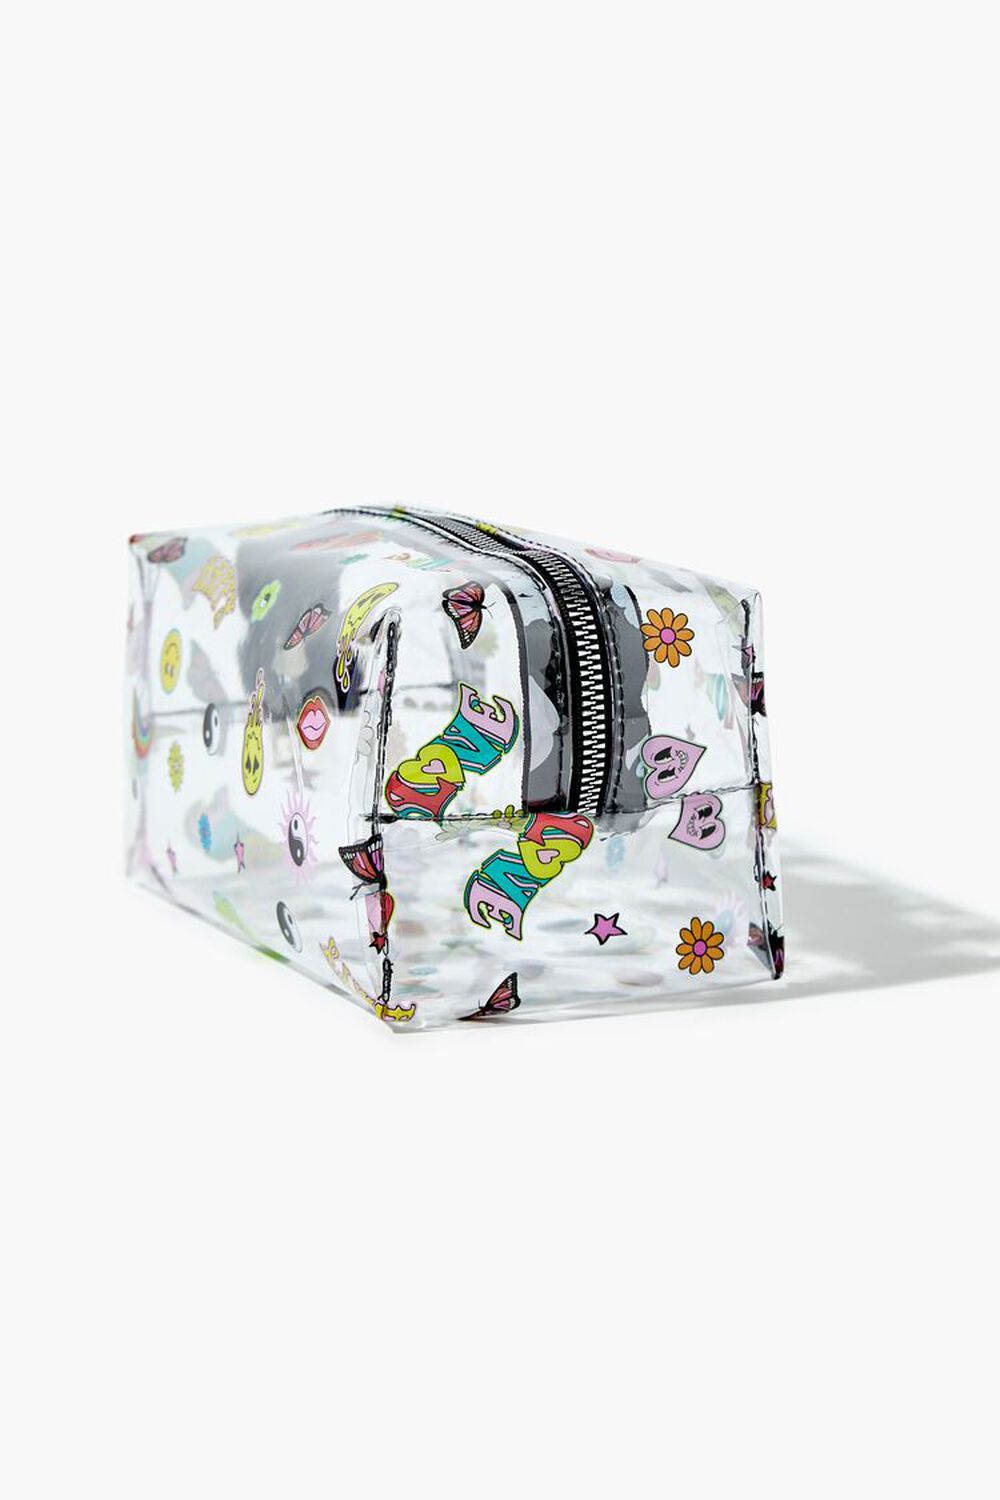 Wish & Win on Instagram: “Win this beautiful bag, two prints to